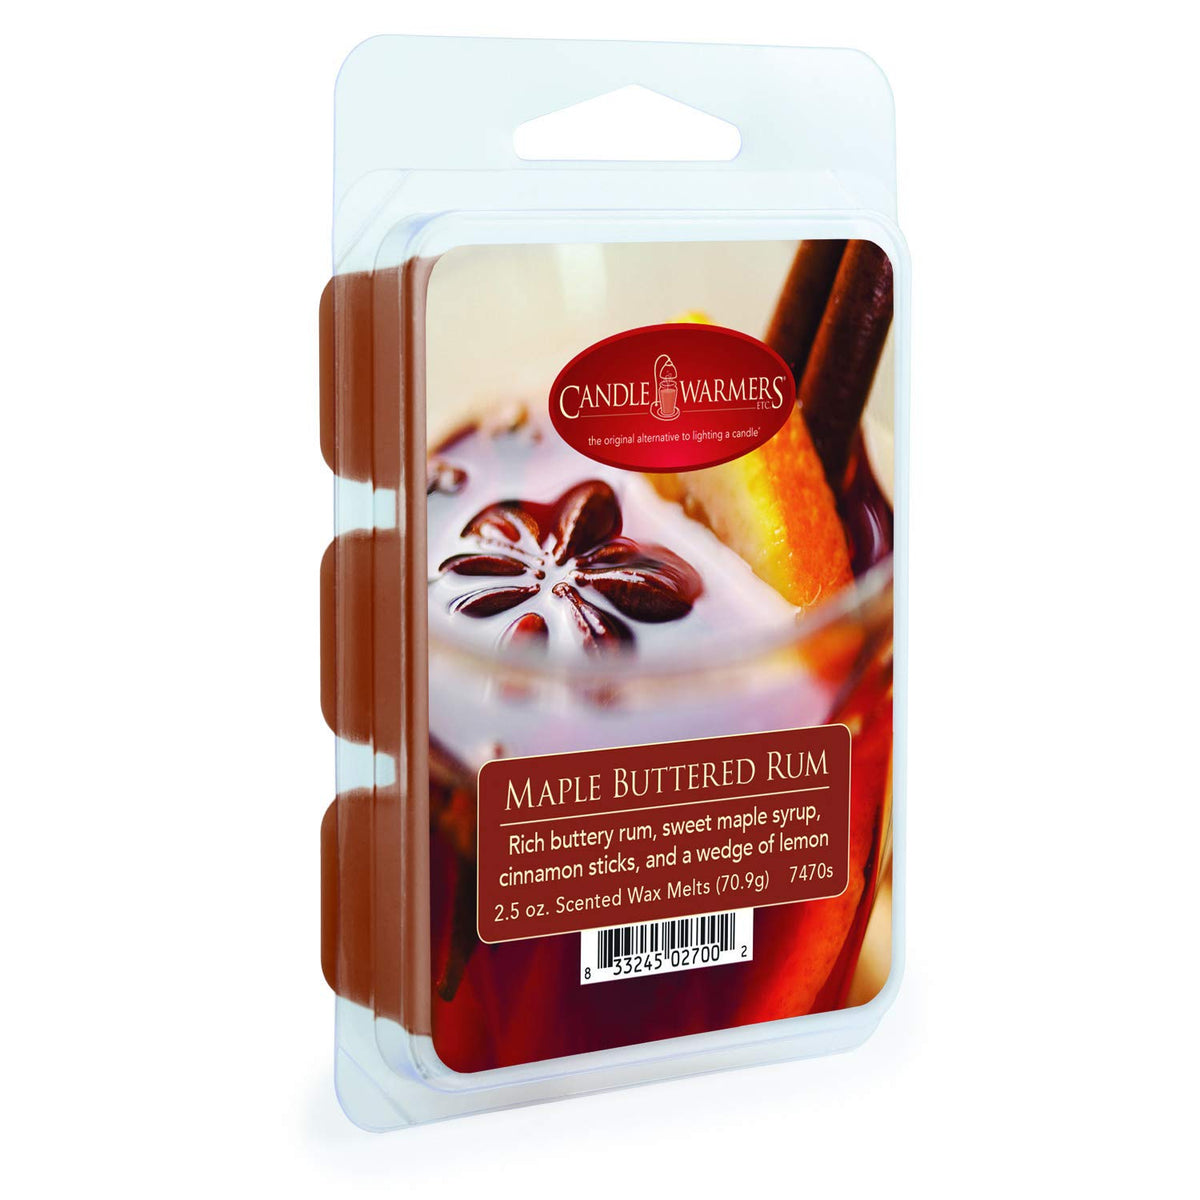 Candle Warmers 7470S Maple Buttered Rum Wax Melts, 2.5 Oz